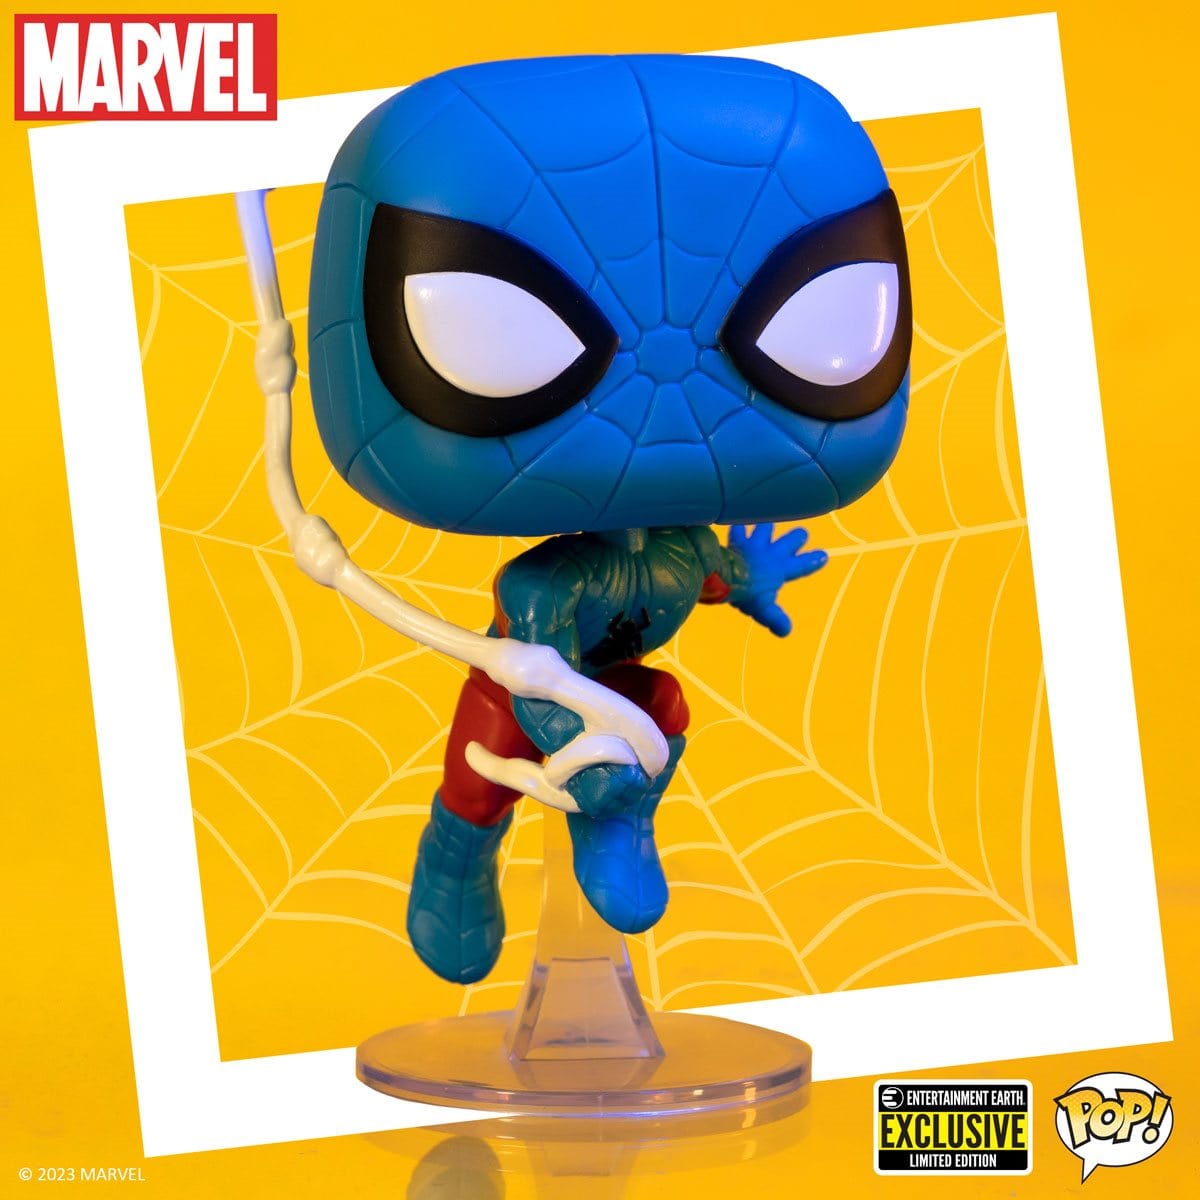 Funko Pop! Marvel: Year of The Spider - Mangaverse Spider-Man - Pop! Marvel:  Year of The Spider - Mangaverse Spider-Man . Buy Action Figure toys in  India. shop for Funko products in